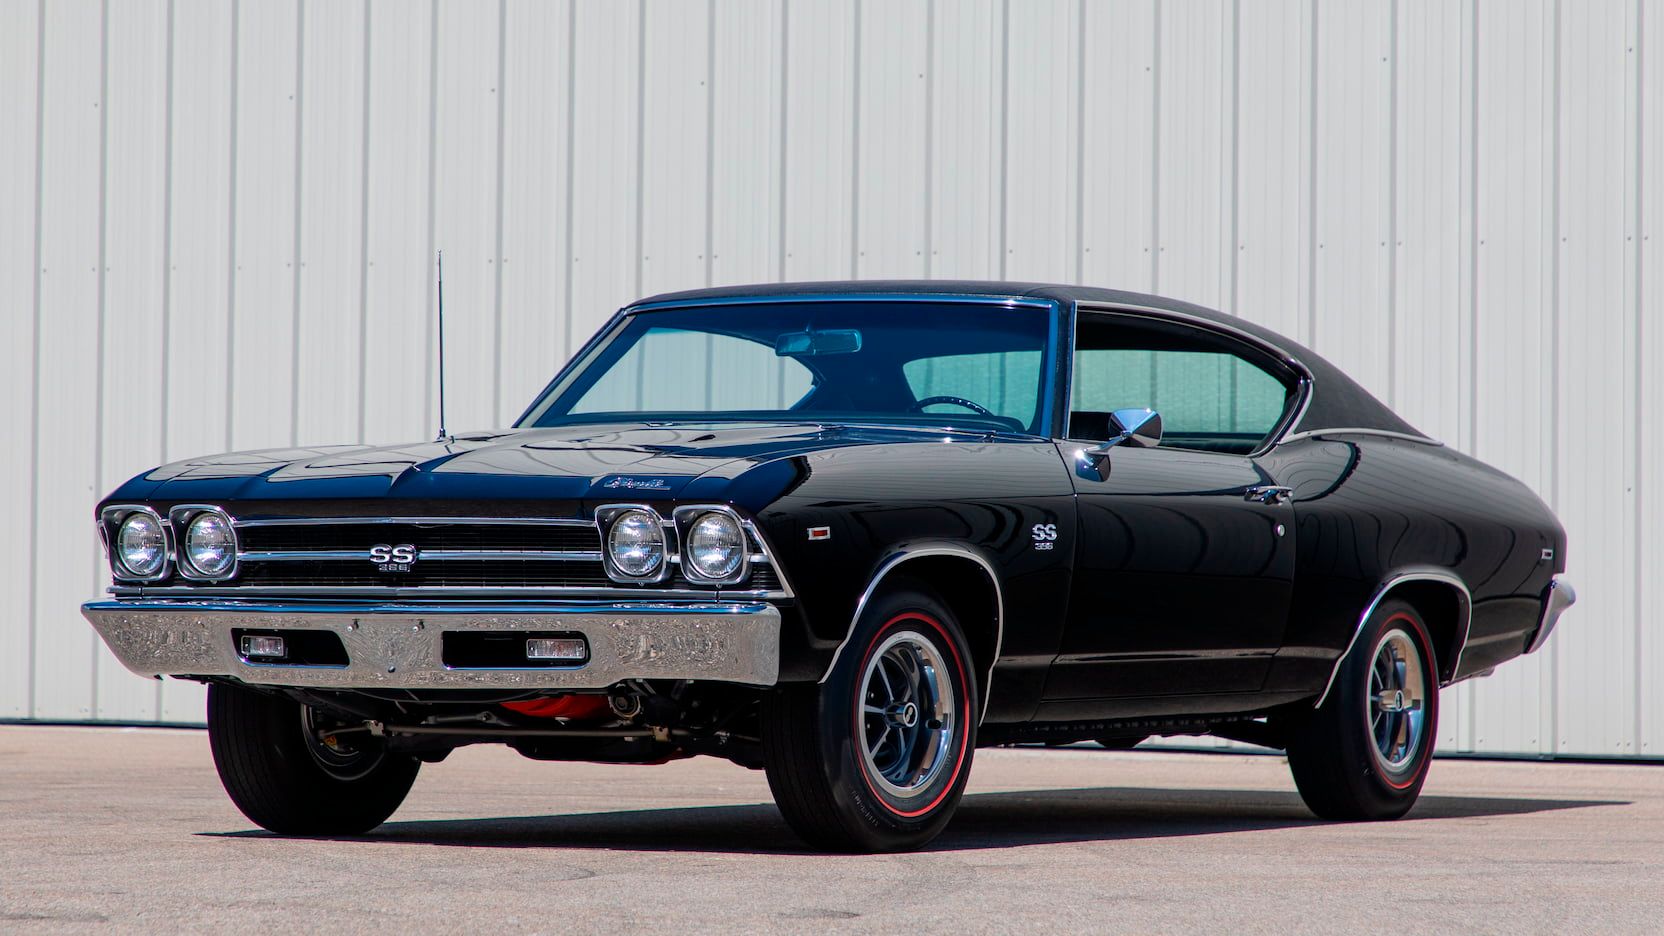 A parked 1969 Chevy Chevelle SS